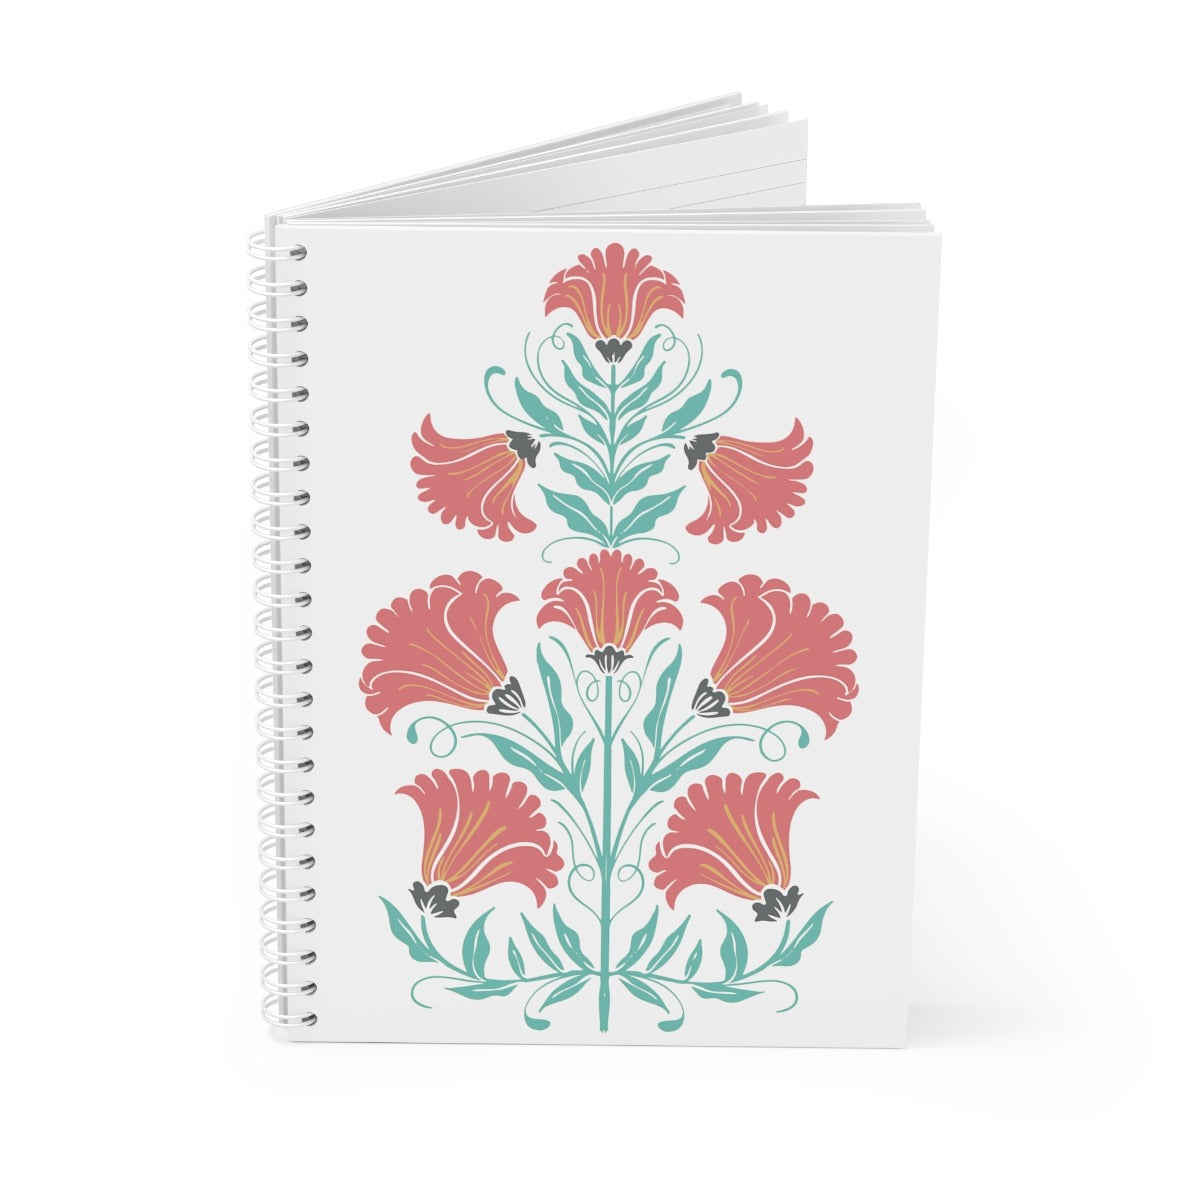 Printed Spiral Notebook With Flowers